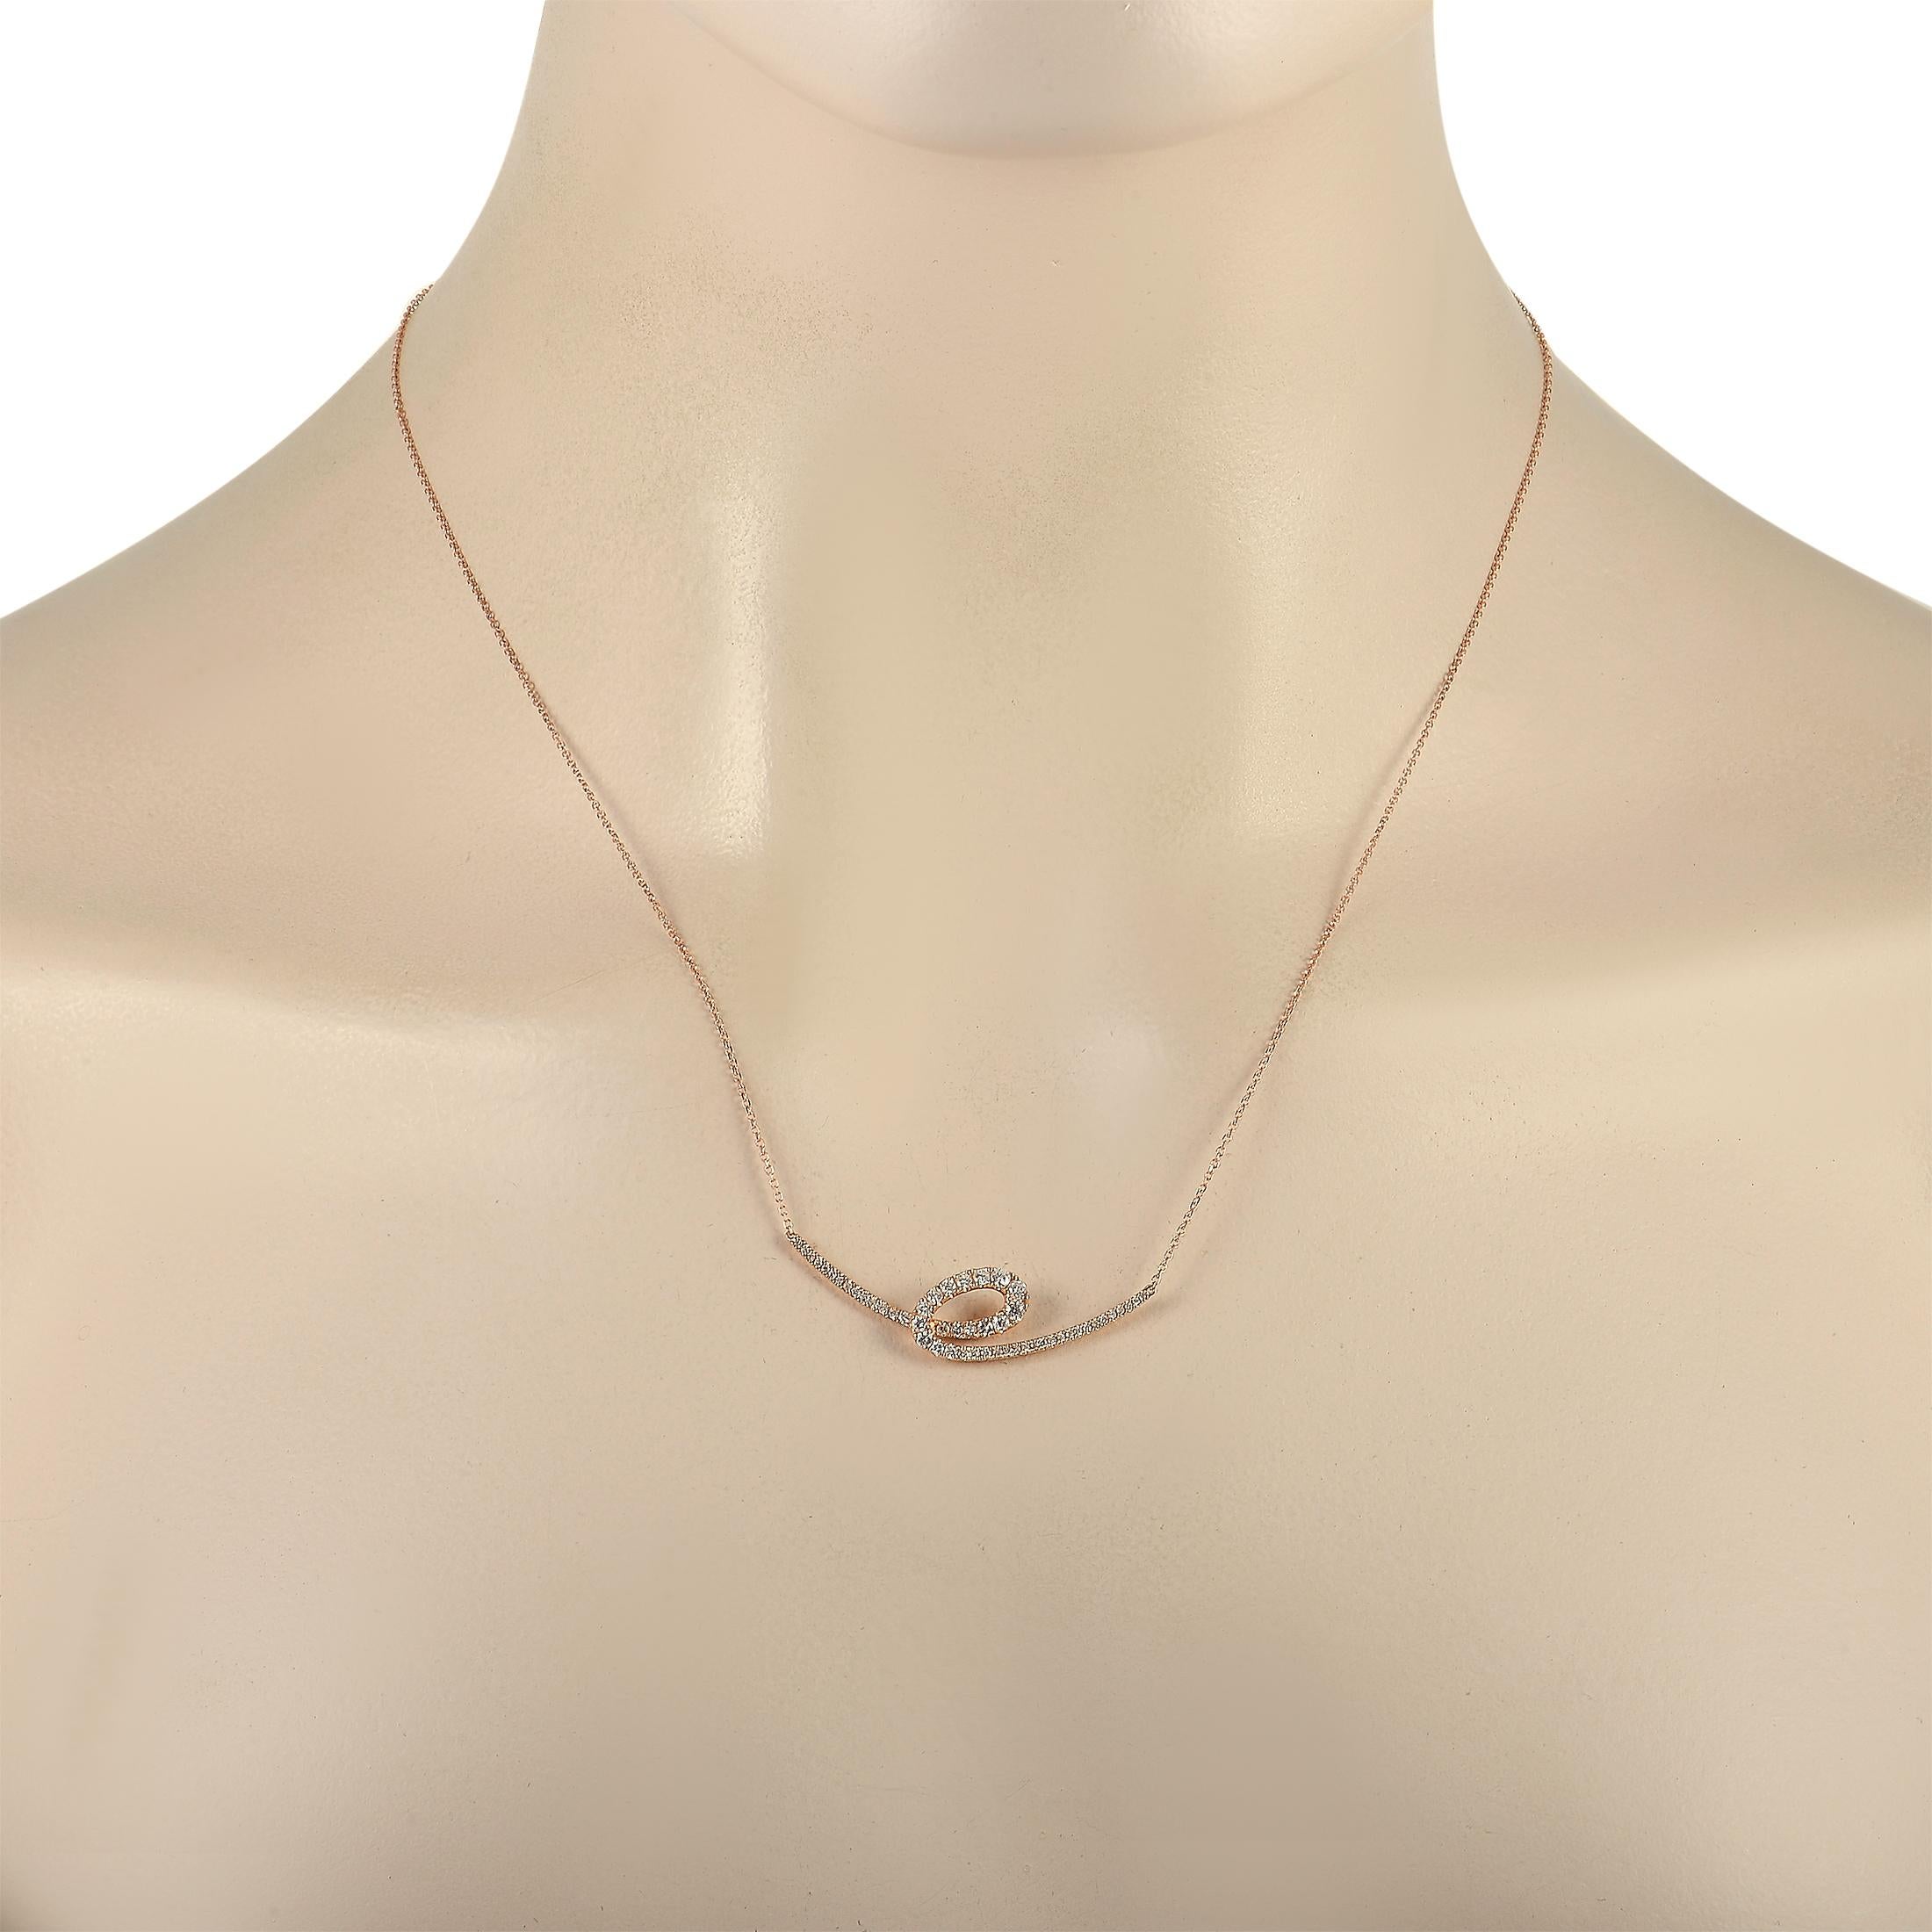 This sleek, simple pendant necklace is a piece that will elevate any ensemble. Crafted from 14K rose gold, a pendant measuring 1.5” long and 0.5” wide is elegantly suspended from an 16” chain. The gracefully curved design of the pendant is made even